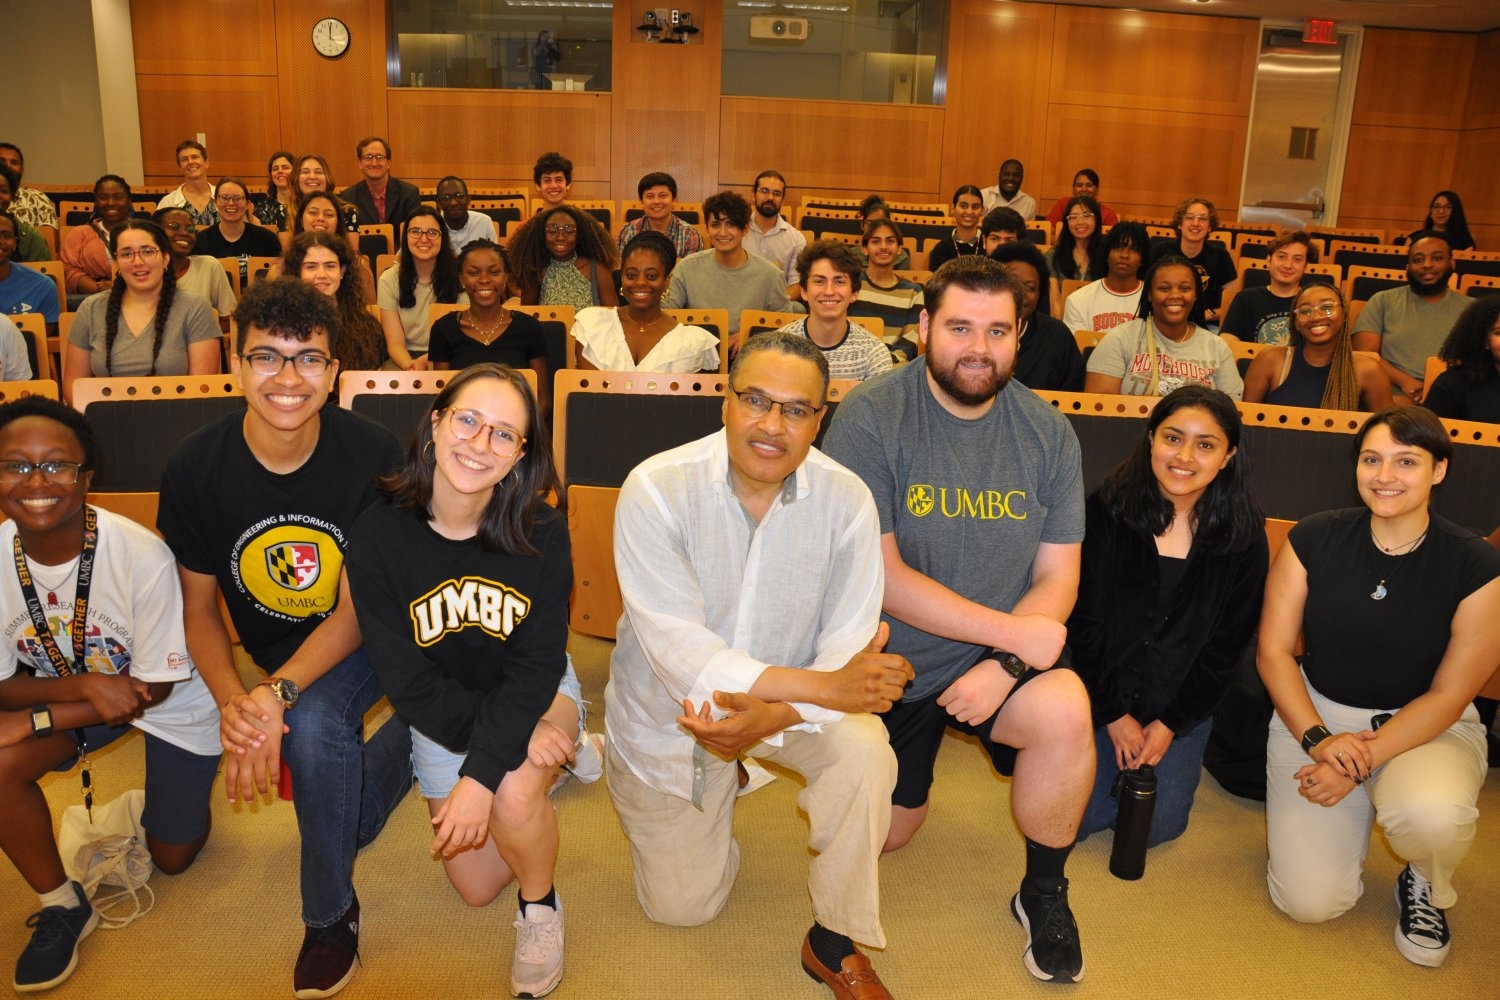 Freeman Hrabowski (center) posed for photos with a crowd of more than 50 before and after an informal event at MIT.